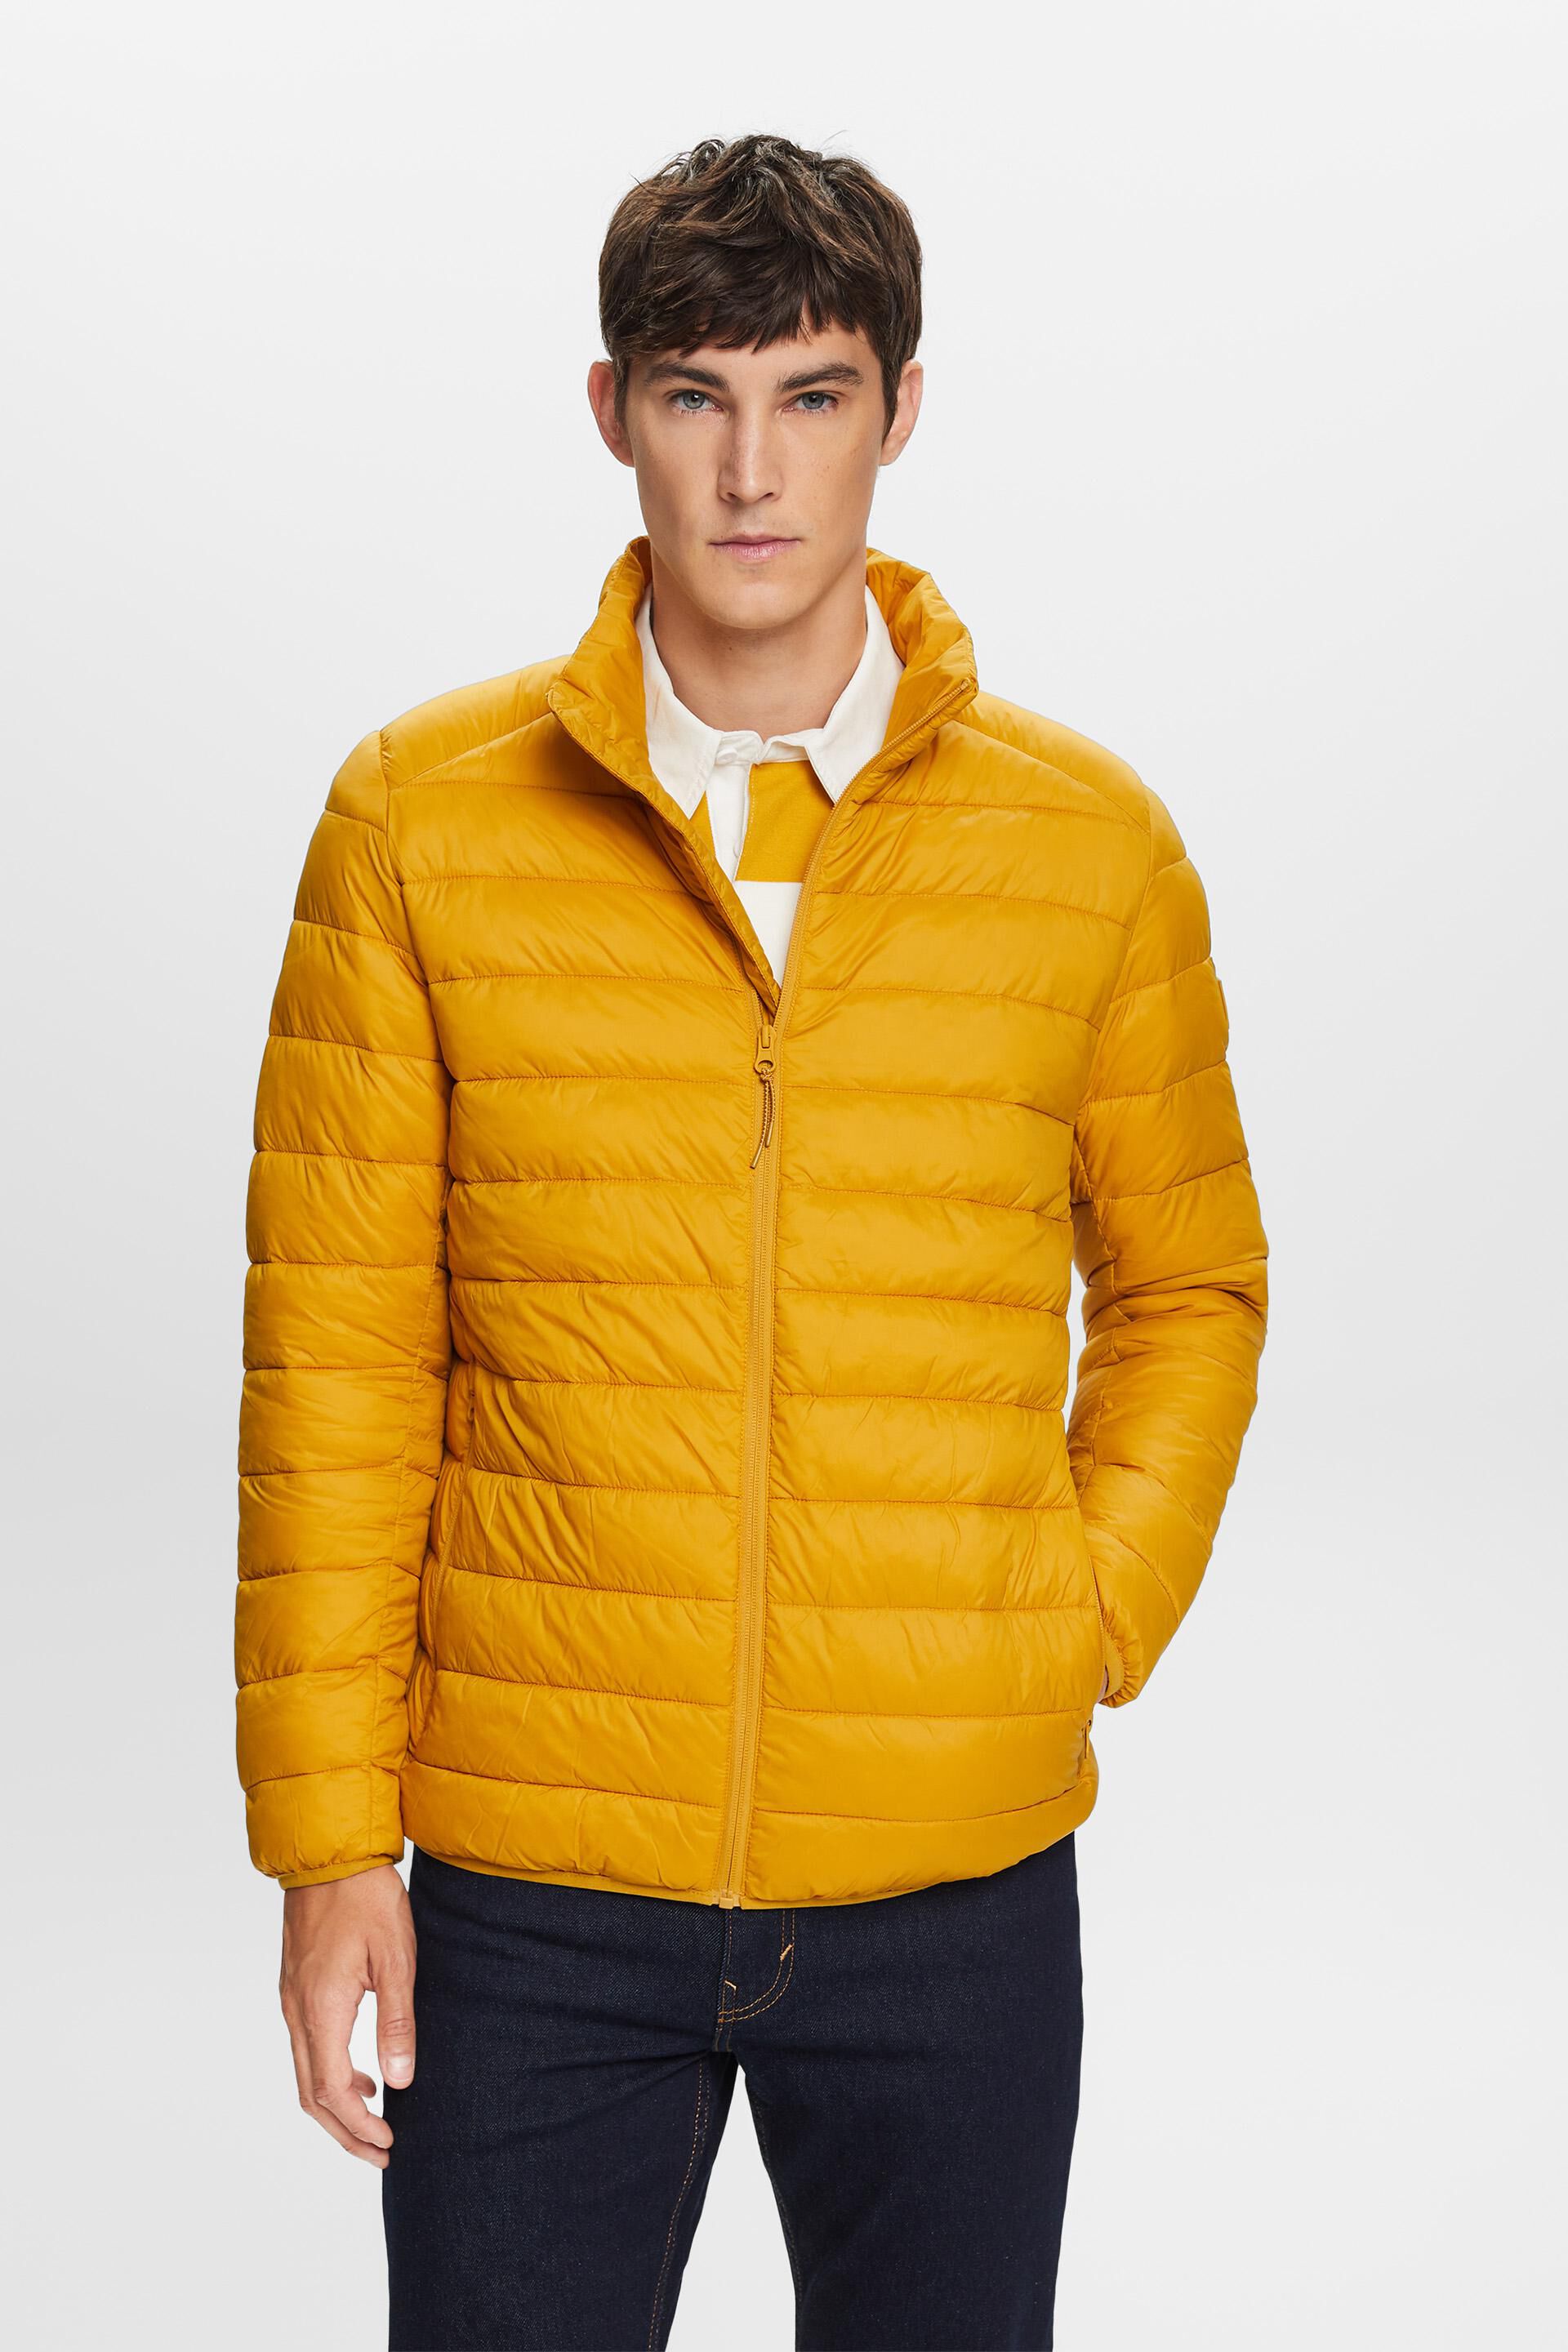 Esprit neck high jacket with Quilted